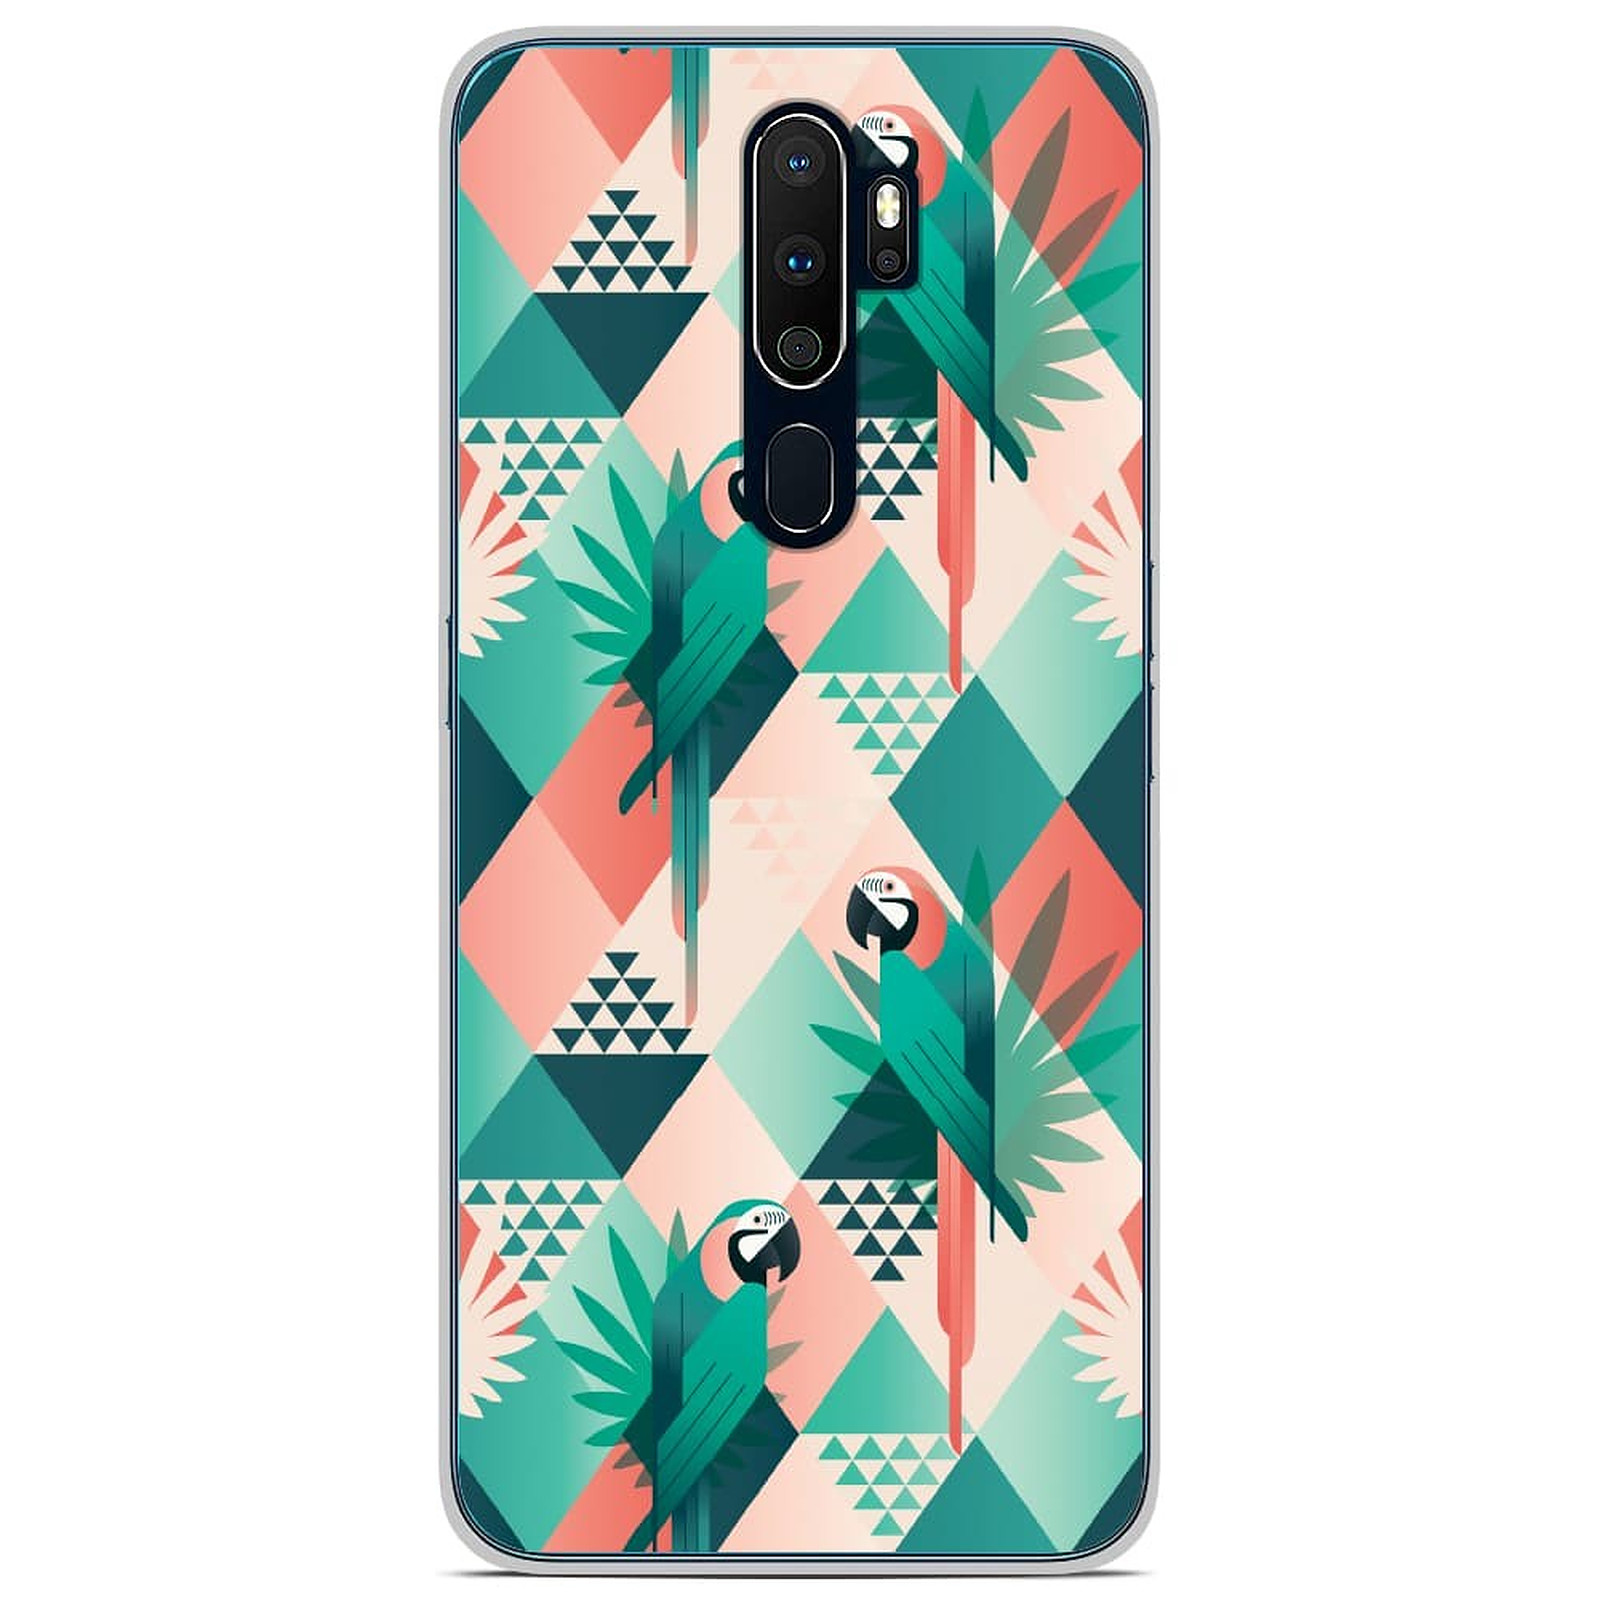 1001 Coques Coque silicone gel Oppo A9 2020 motif Perroquet ge´ome´trique - Coque telephone 1001Coques